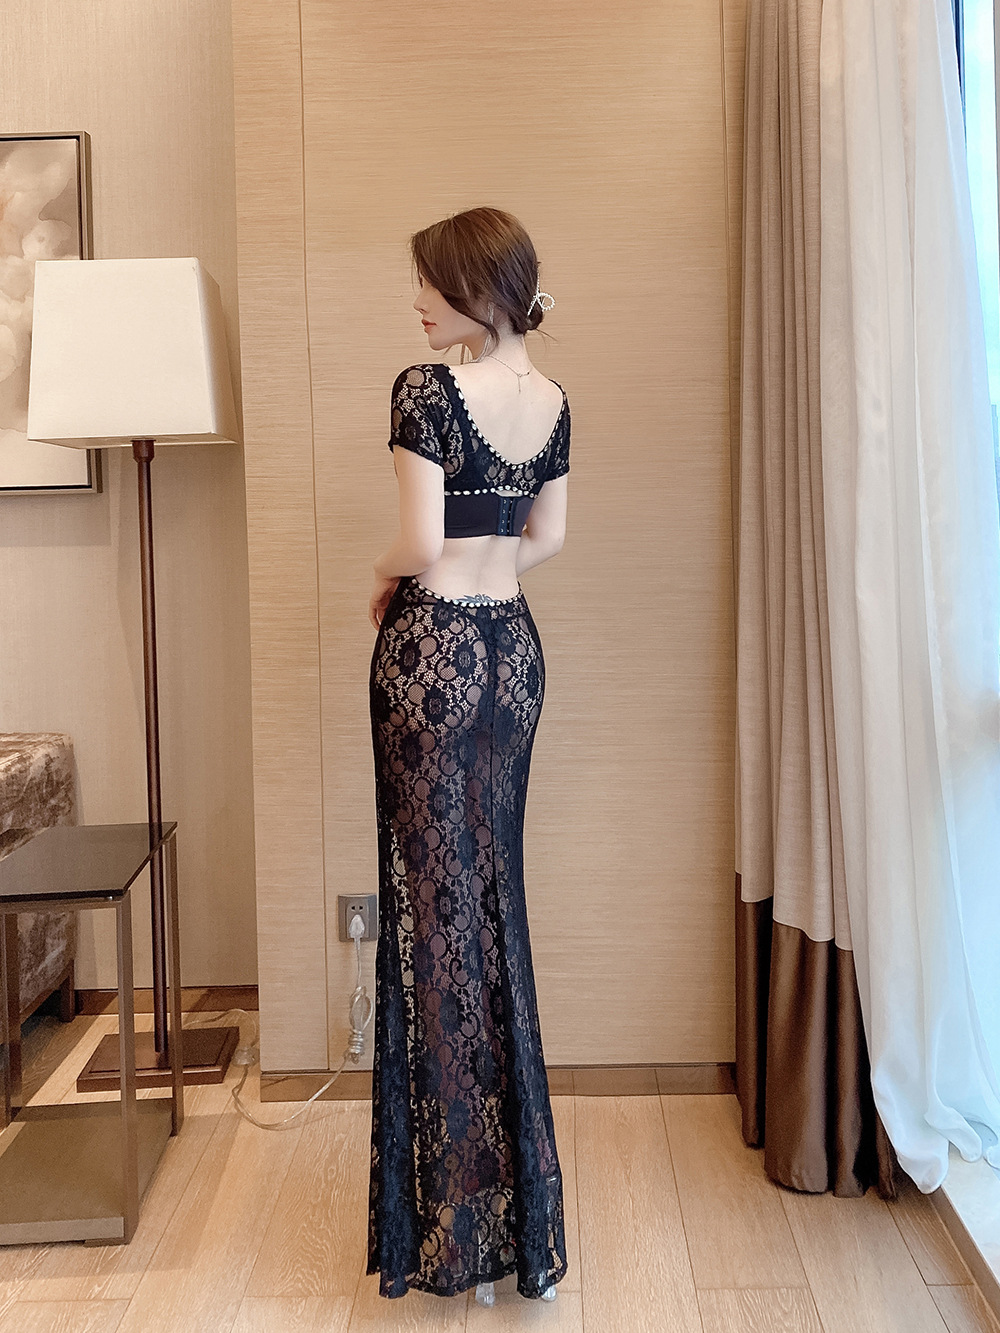 Low-cut lace dress overalls night show long dress for women